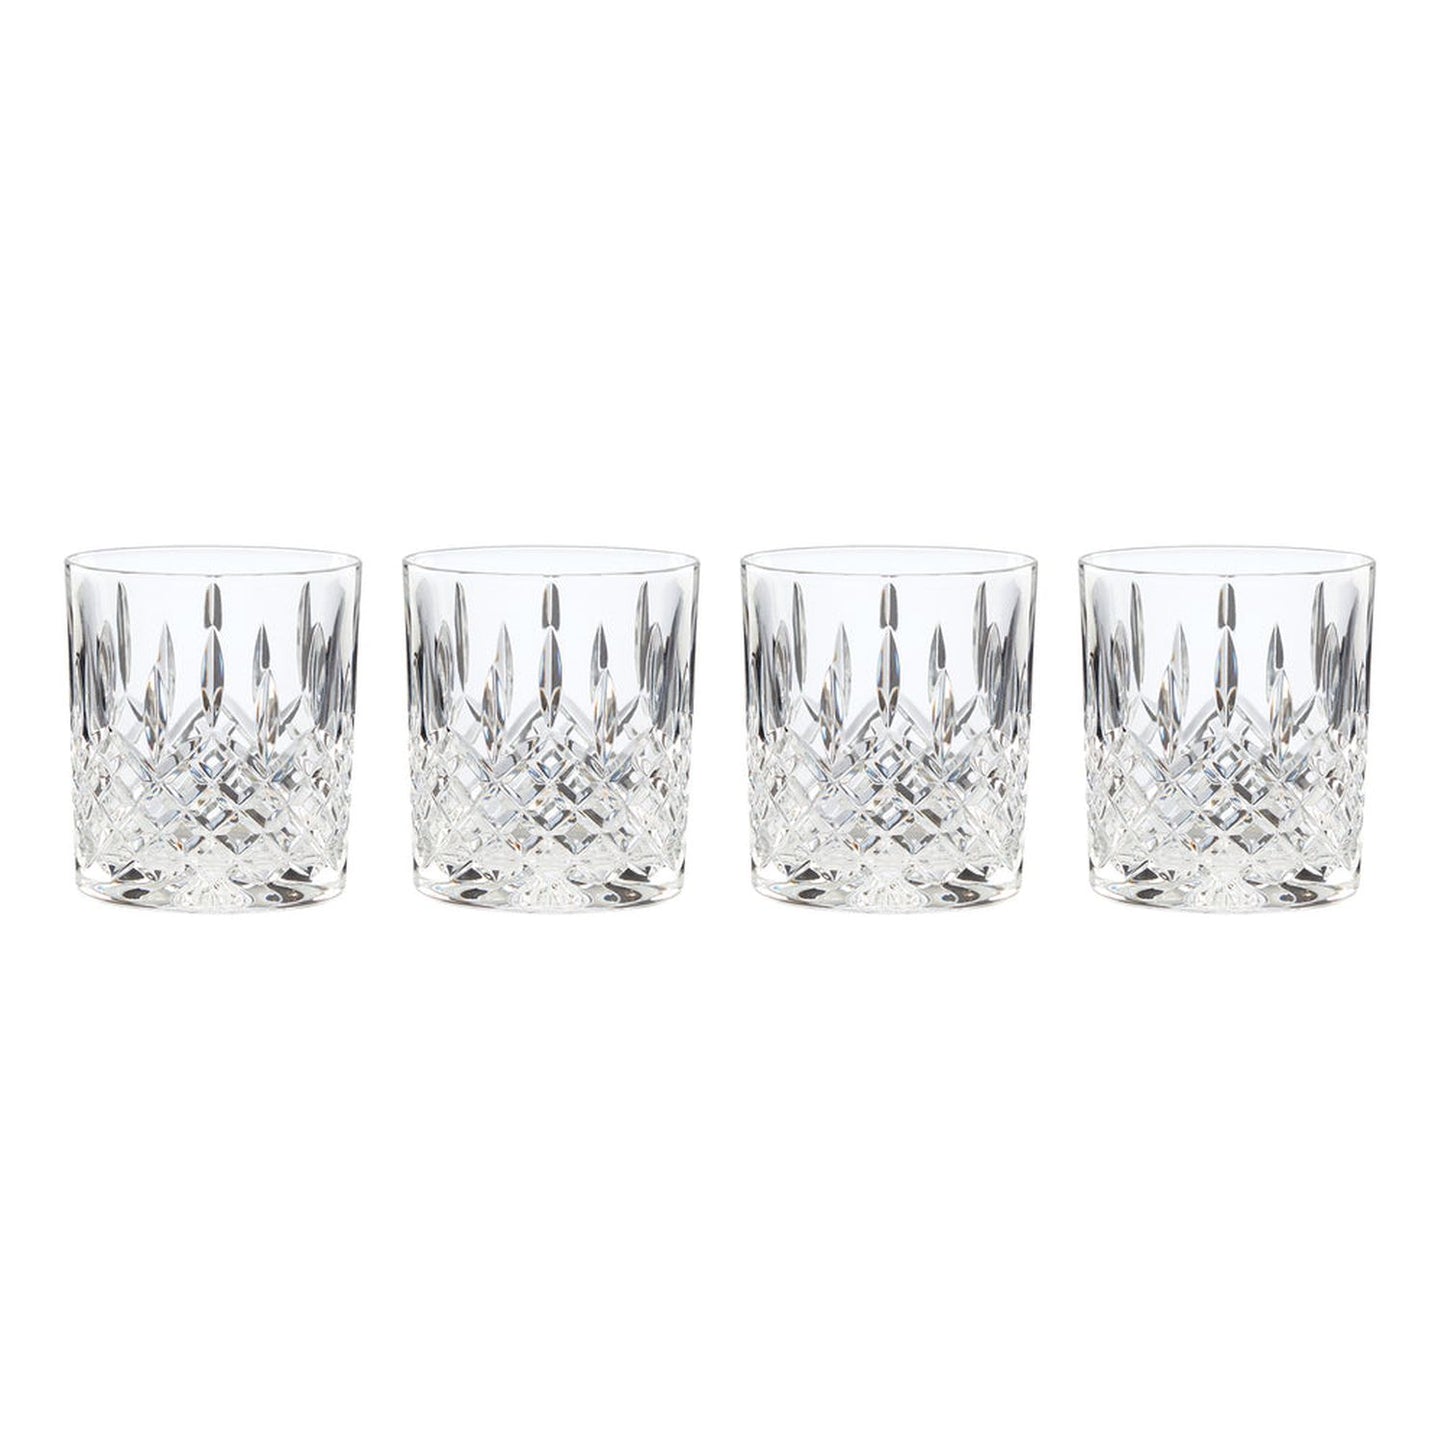 Reed And Barton Hamilton 12 Ounce Double Old Fashioned Set Of 4